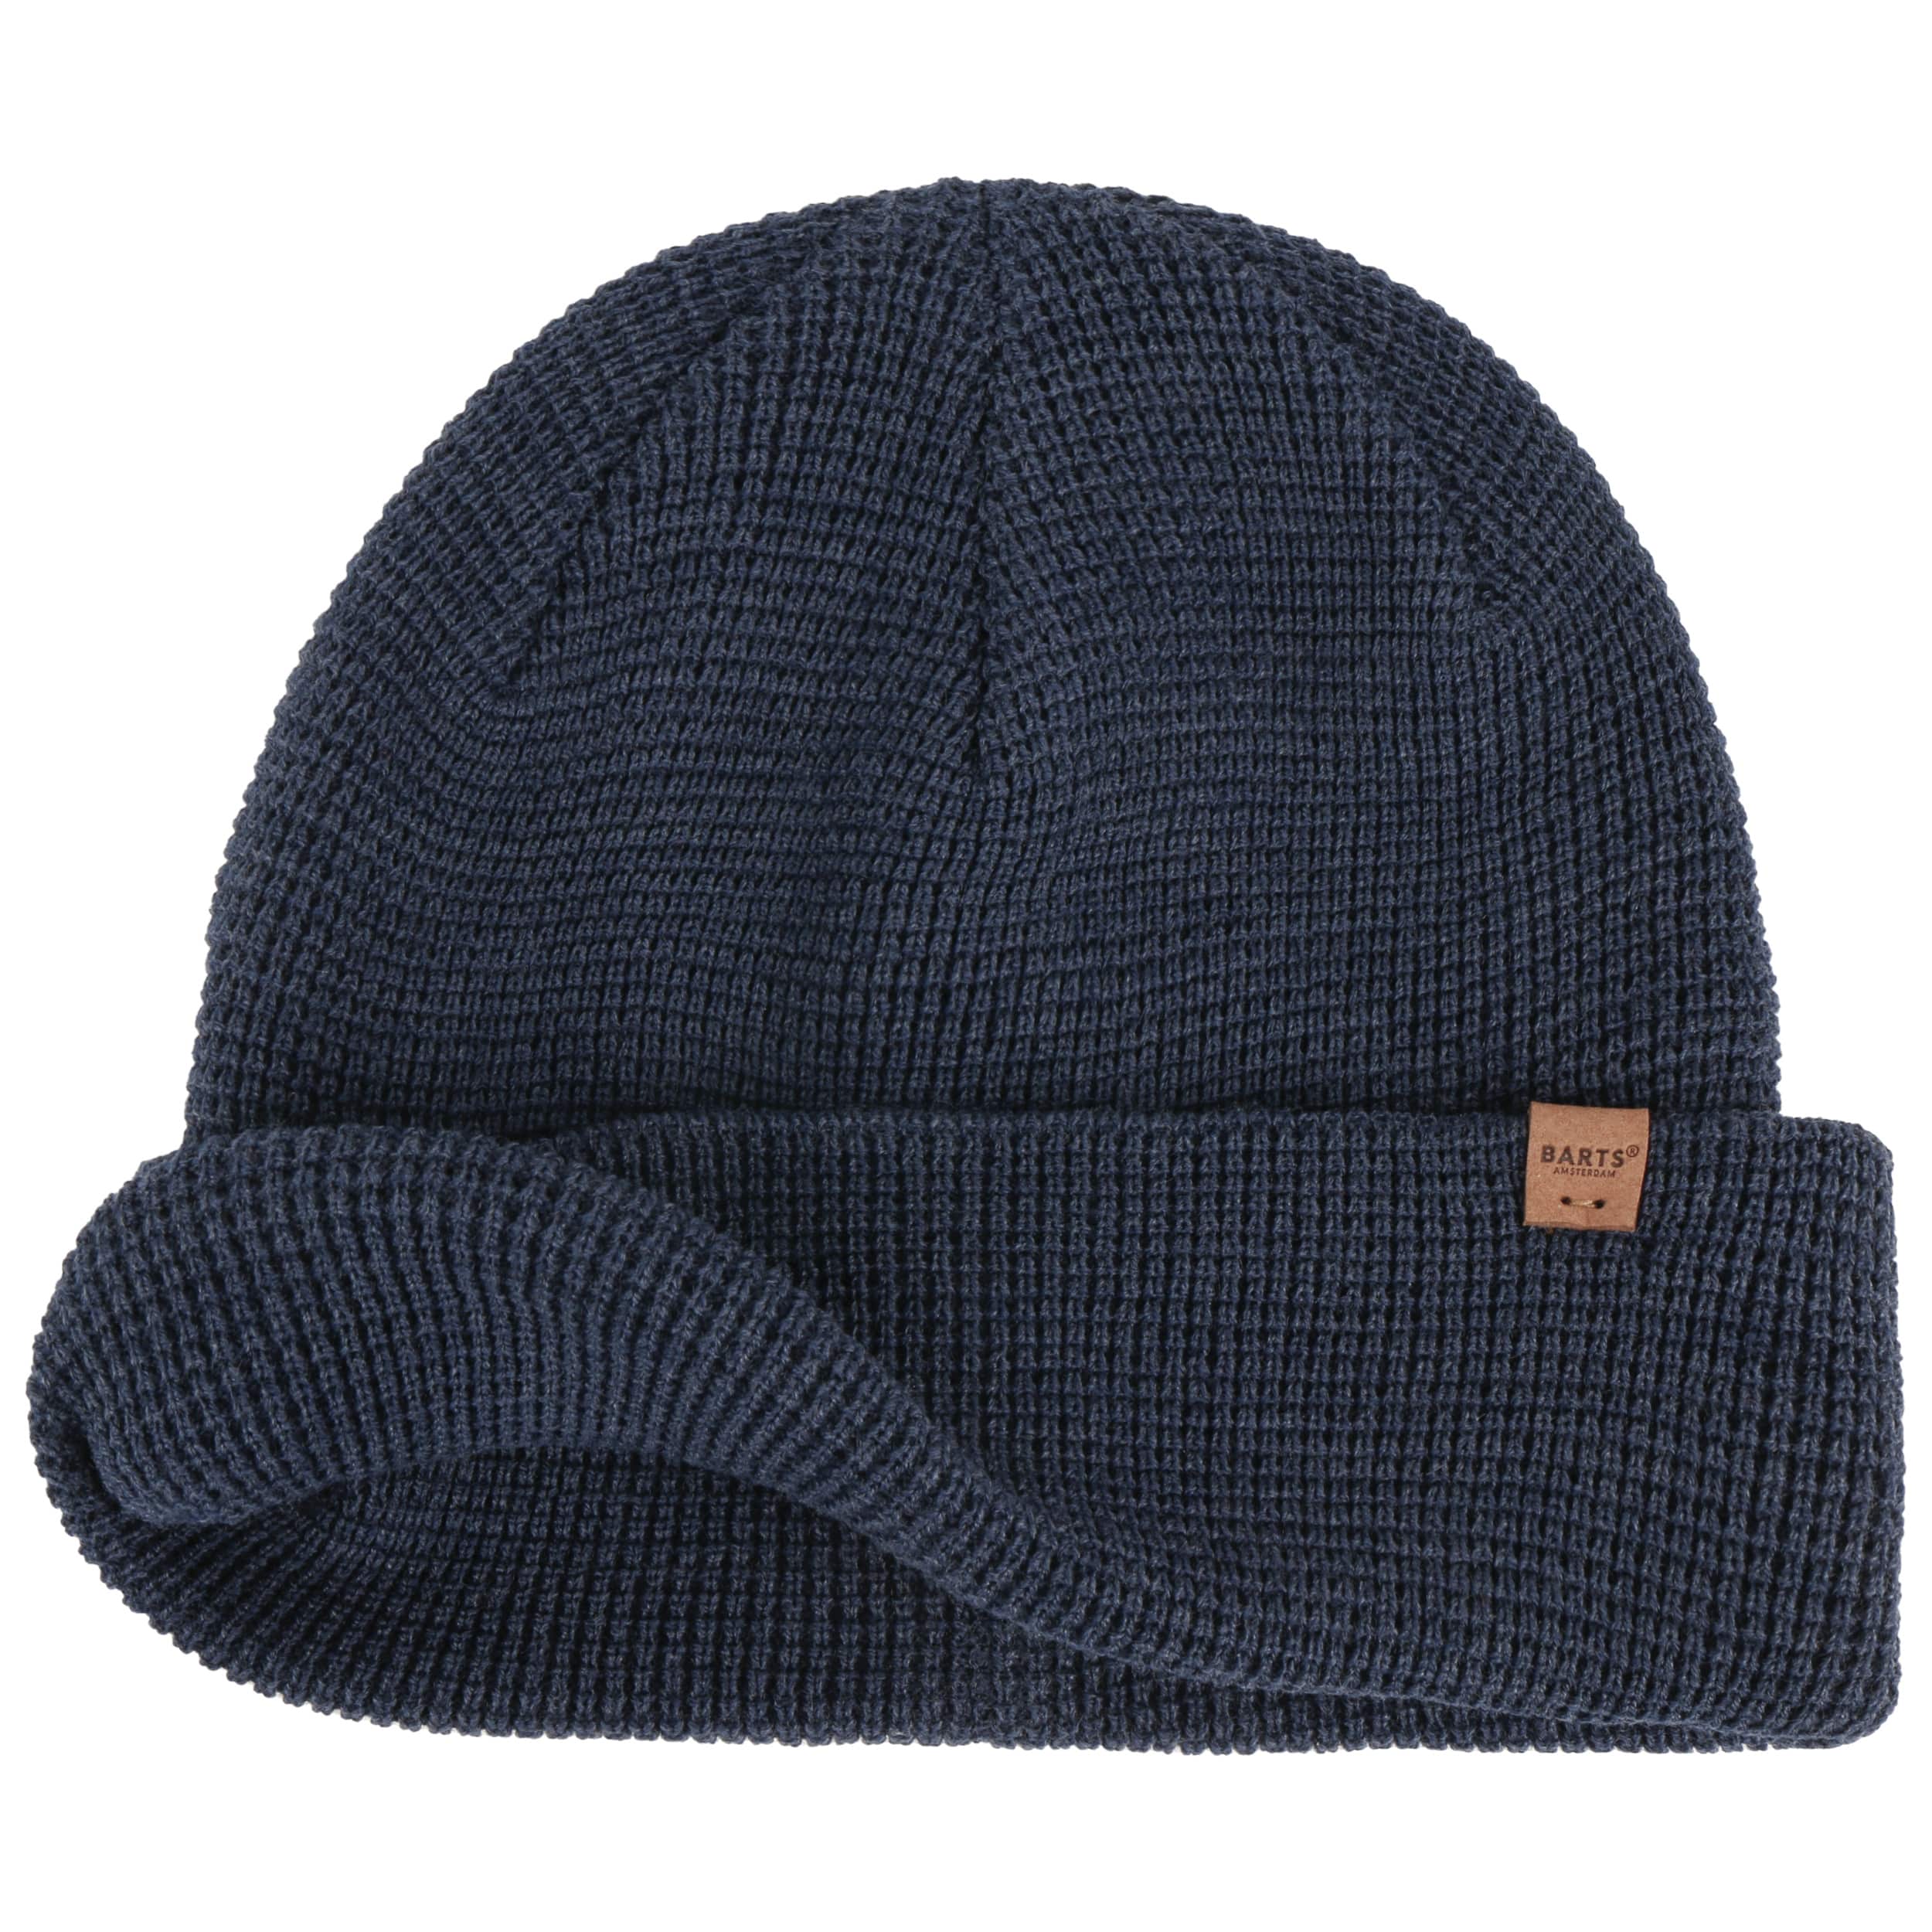 - Coler Hat £ 22,95 Barts Beanie by